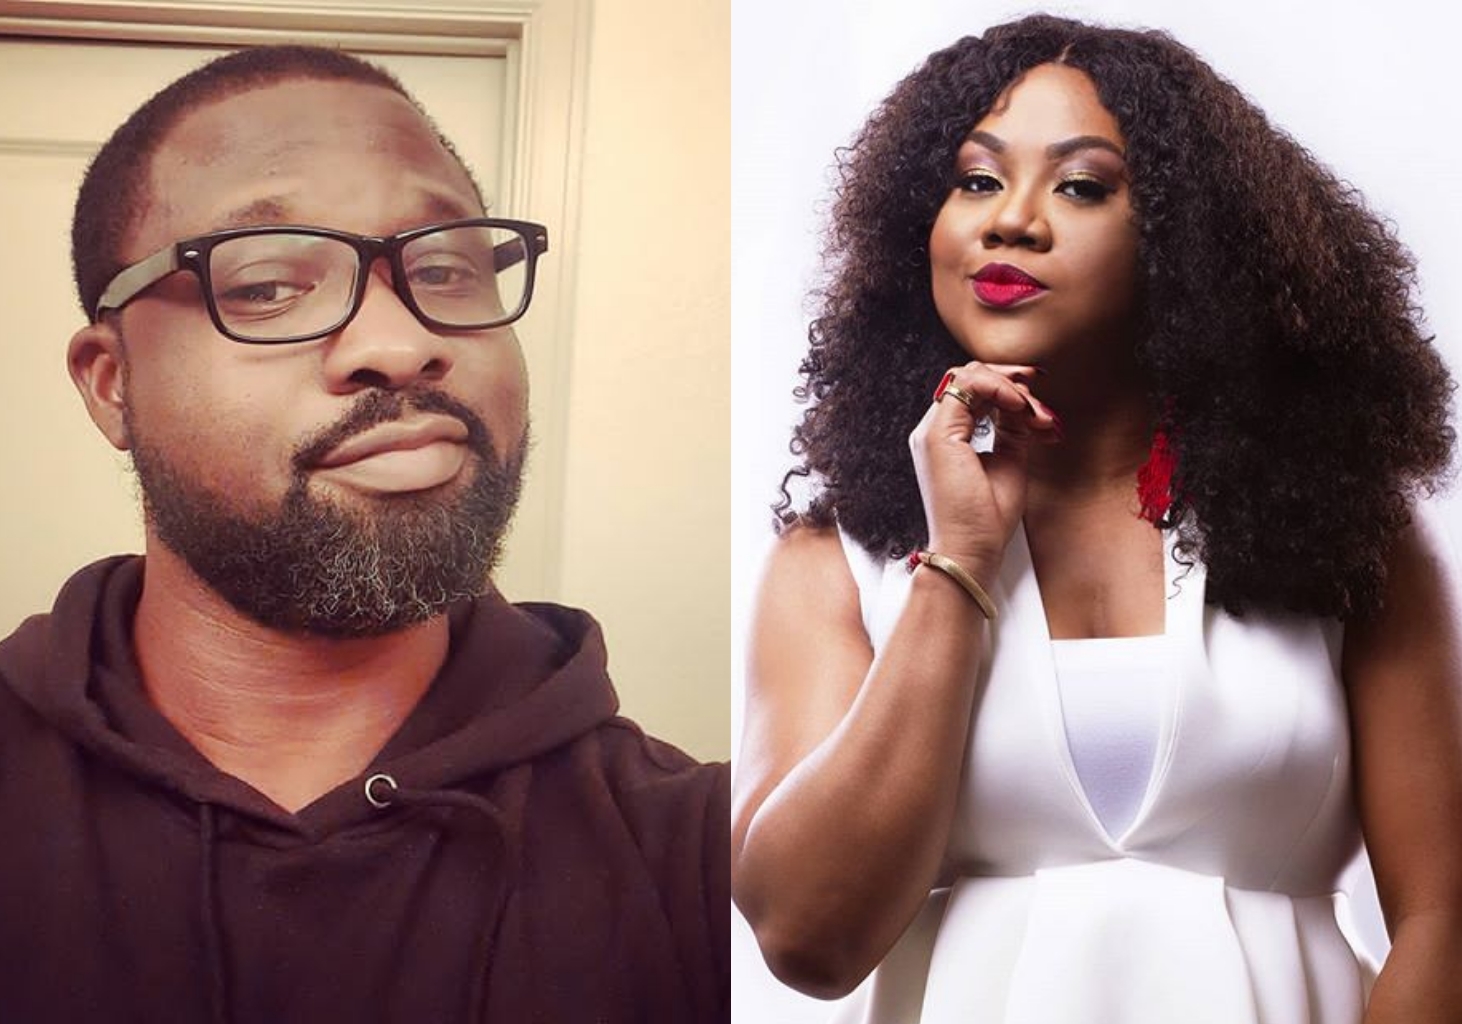 "I felt sad when I was told no sex before marriage" - Actress Stella Damasus opens up (Video)